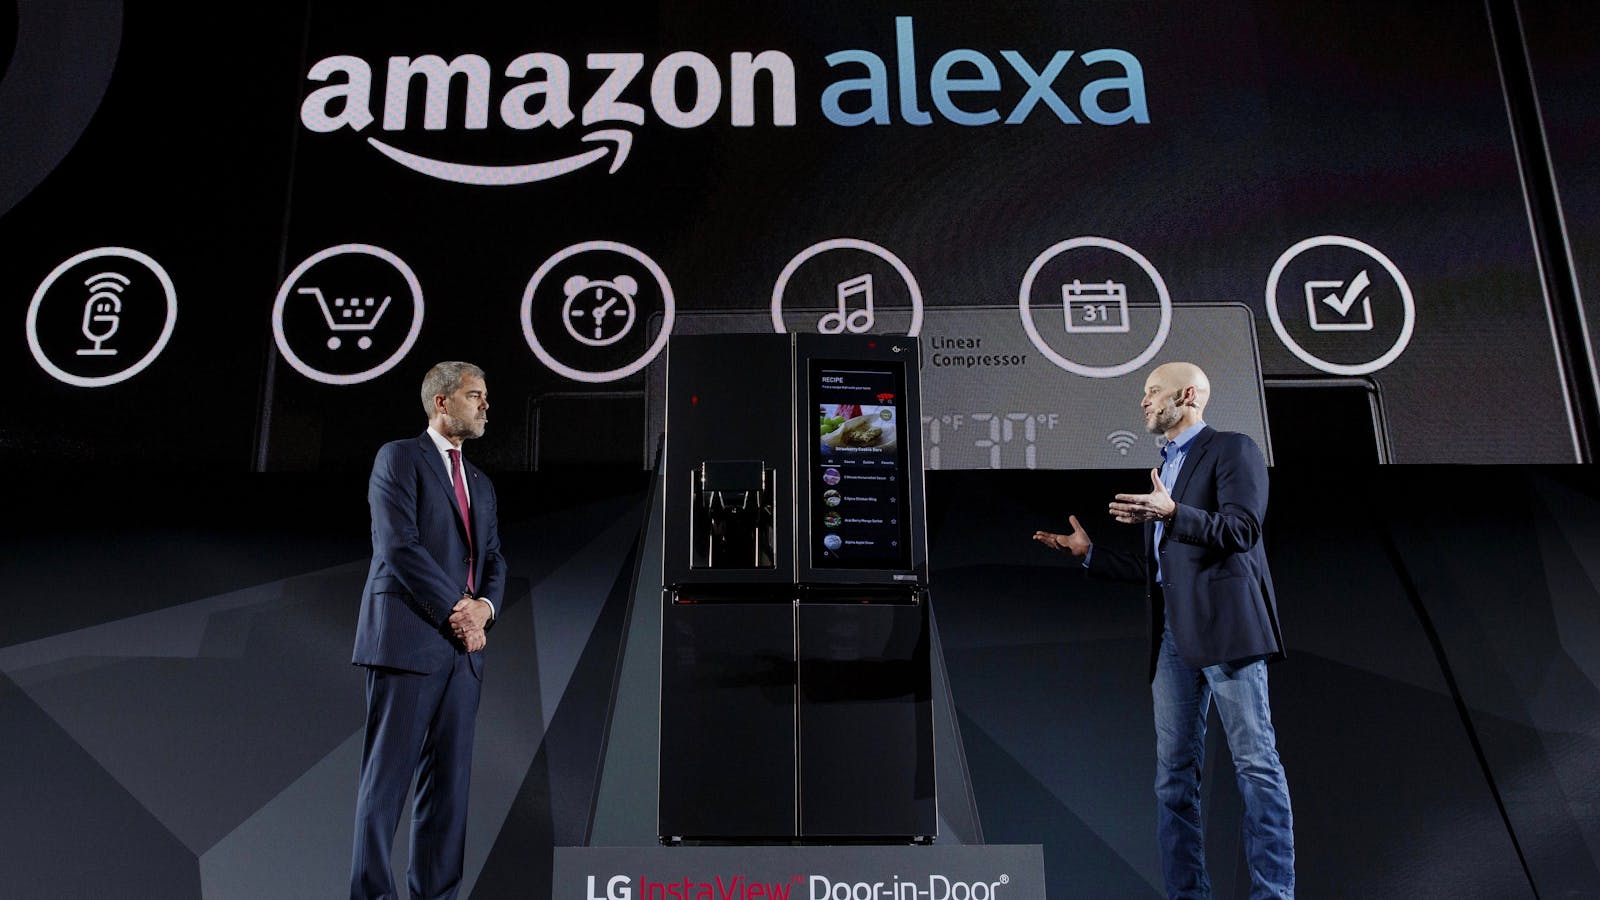 David VanderWaal, vice president of marketing for LG Electronics USA and Michael George, vice president of Alexa, Echo, and Appstore at Amazon, discussing an LG-Amazon Alex partnership at CES this year. Photo by Bloomberg.